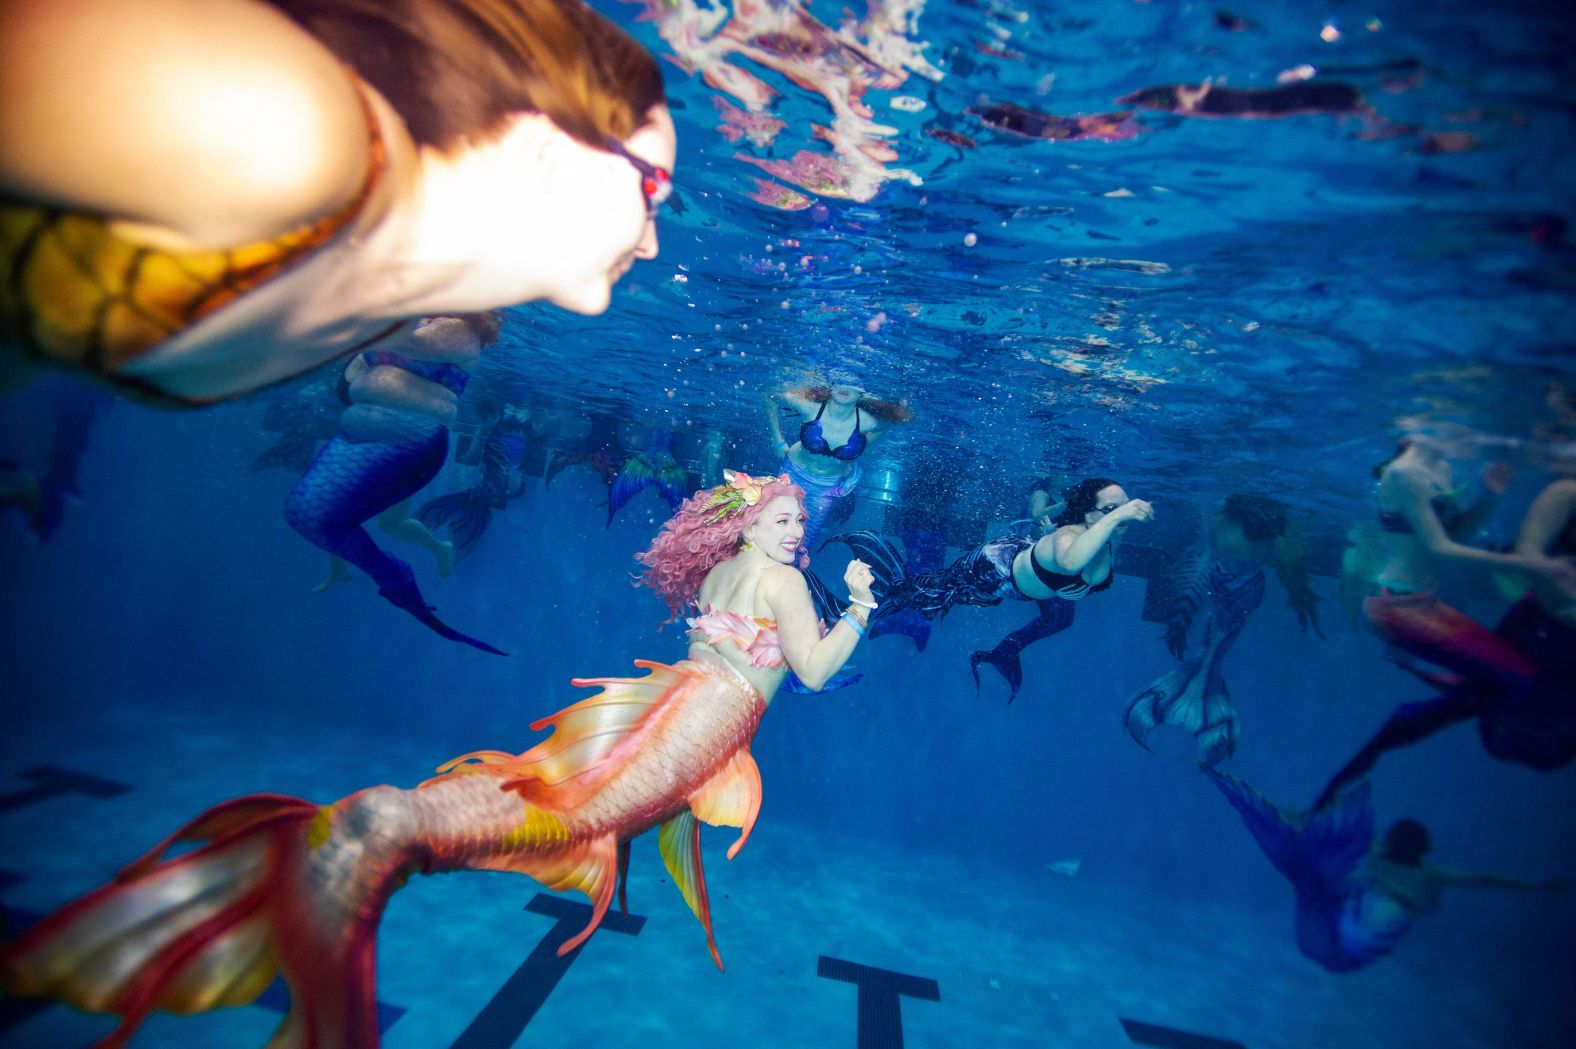 People dressed as mermaids and mermen take part in a group swim Saturday, March 4, during the MerMagic Convention in Manassas, Virginia. The event bills itself as the world's largest mermaid convention.